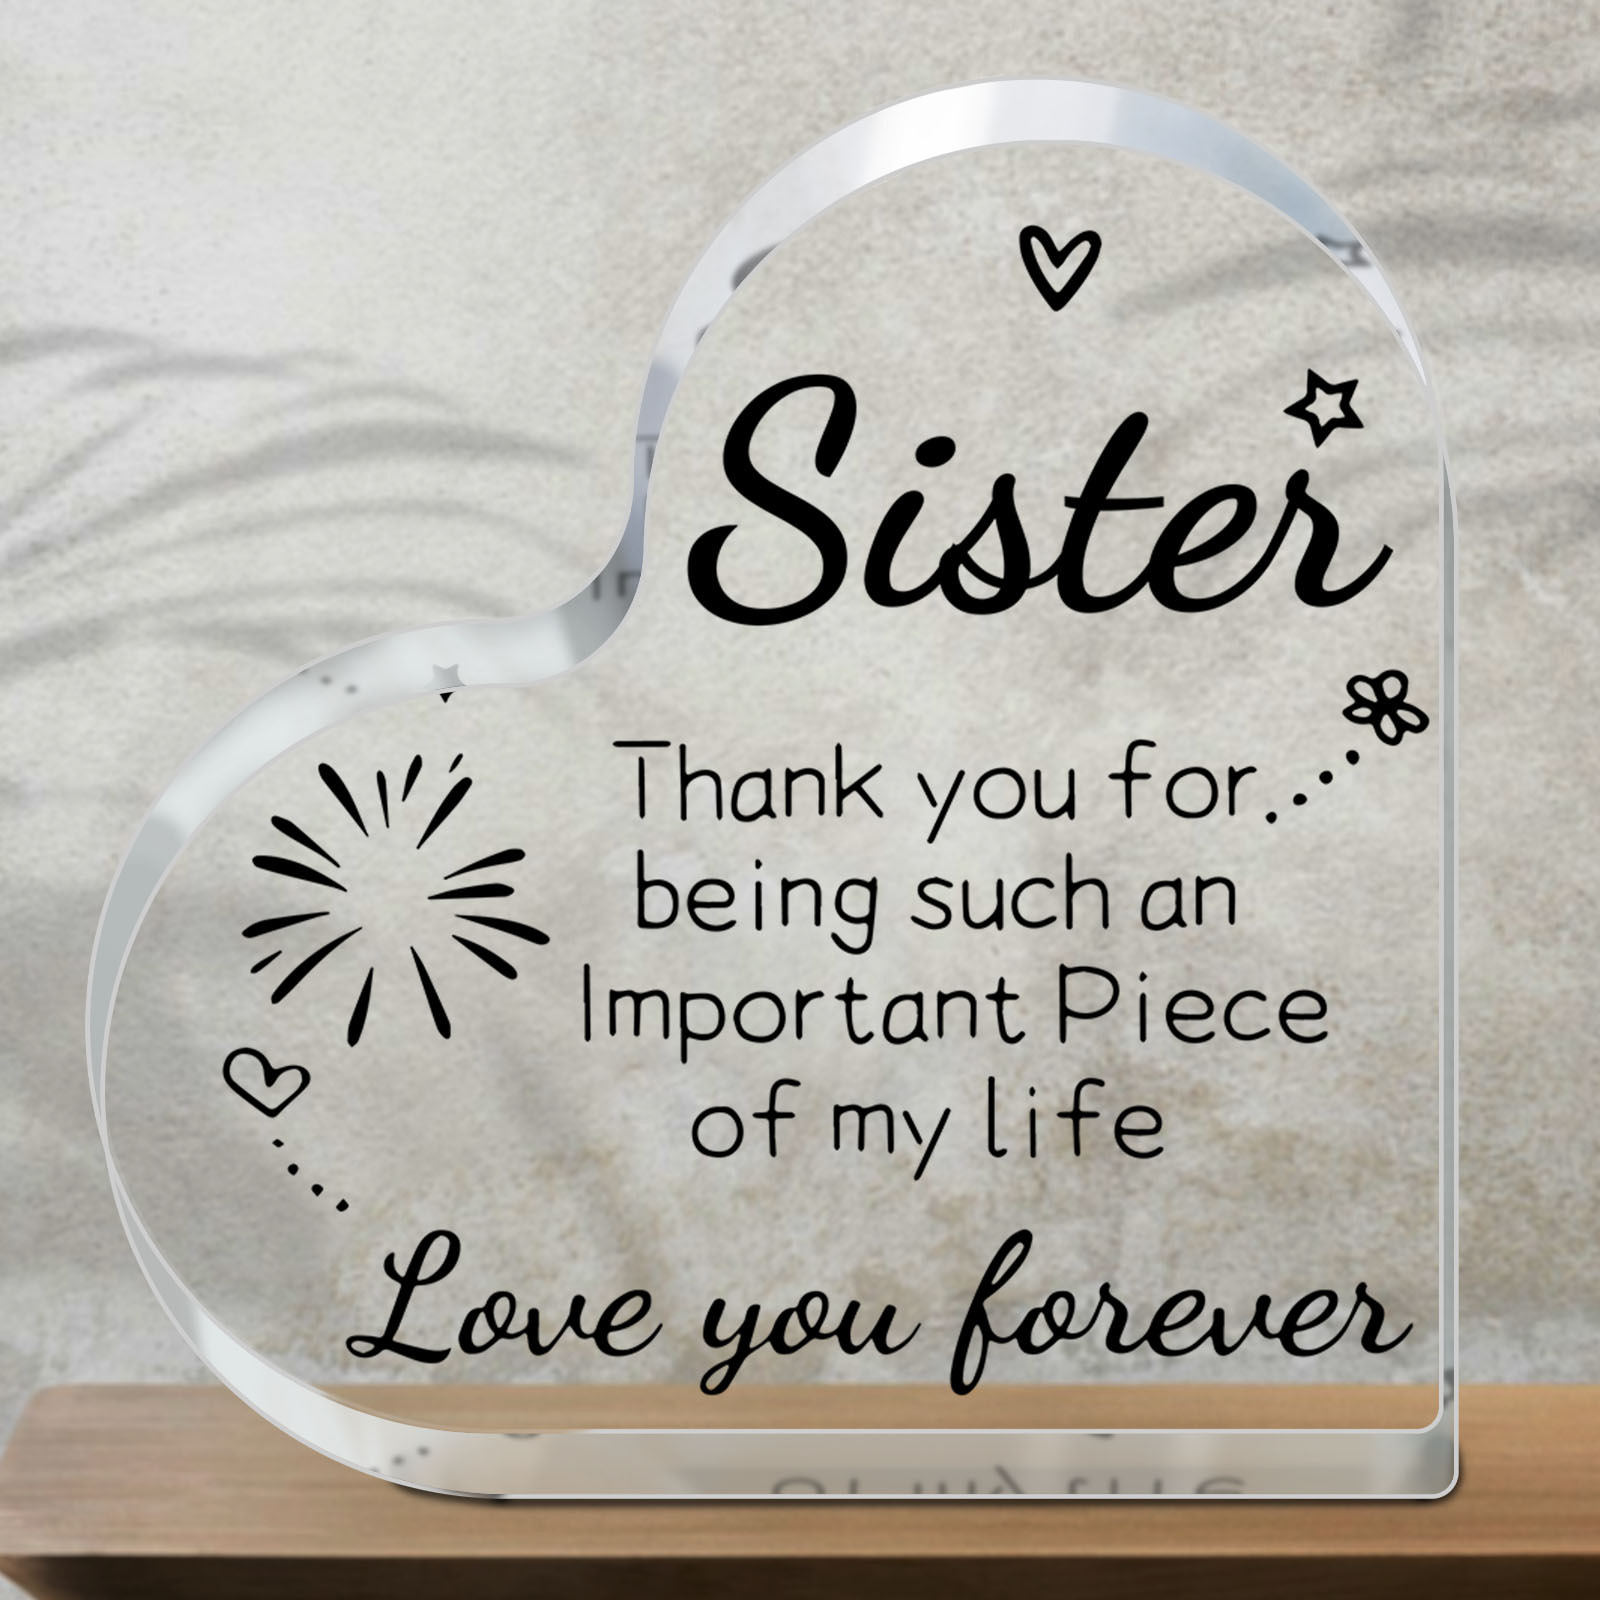 

1pc, Sister Gifts Acrylic Plaque With Sayings - Wedding Birthday Halloween Thanksgiving Christmas Day Gifts For Sister - Desk Decorations Card Gifts For Sister